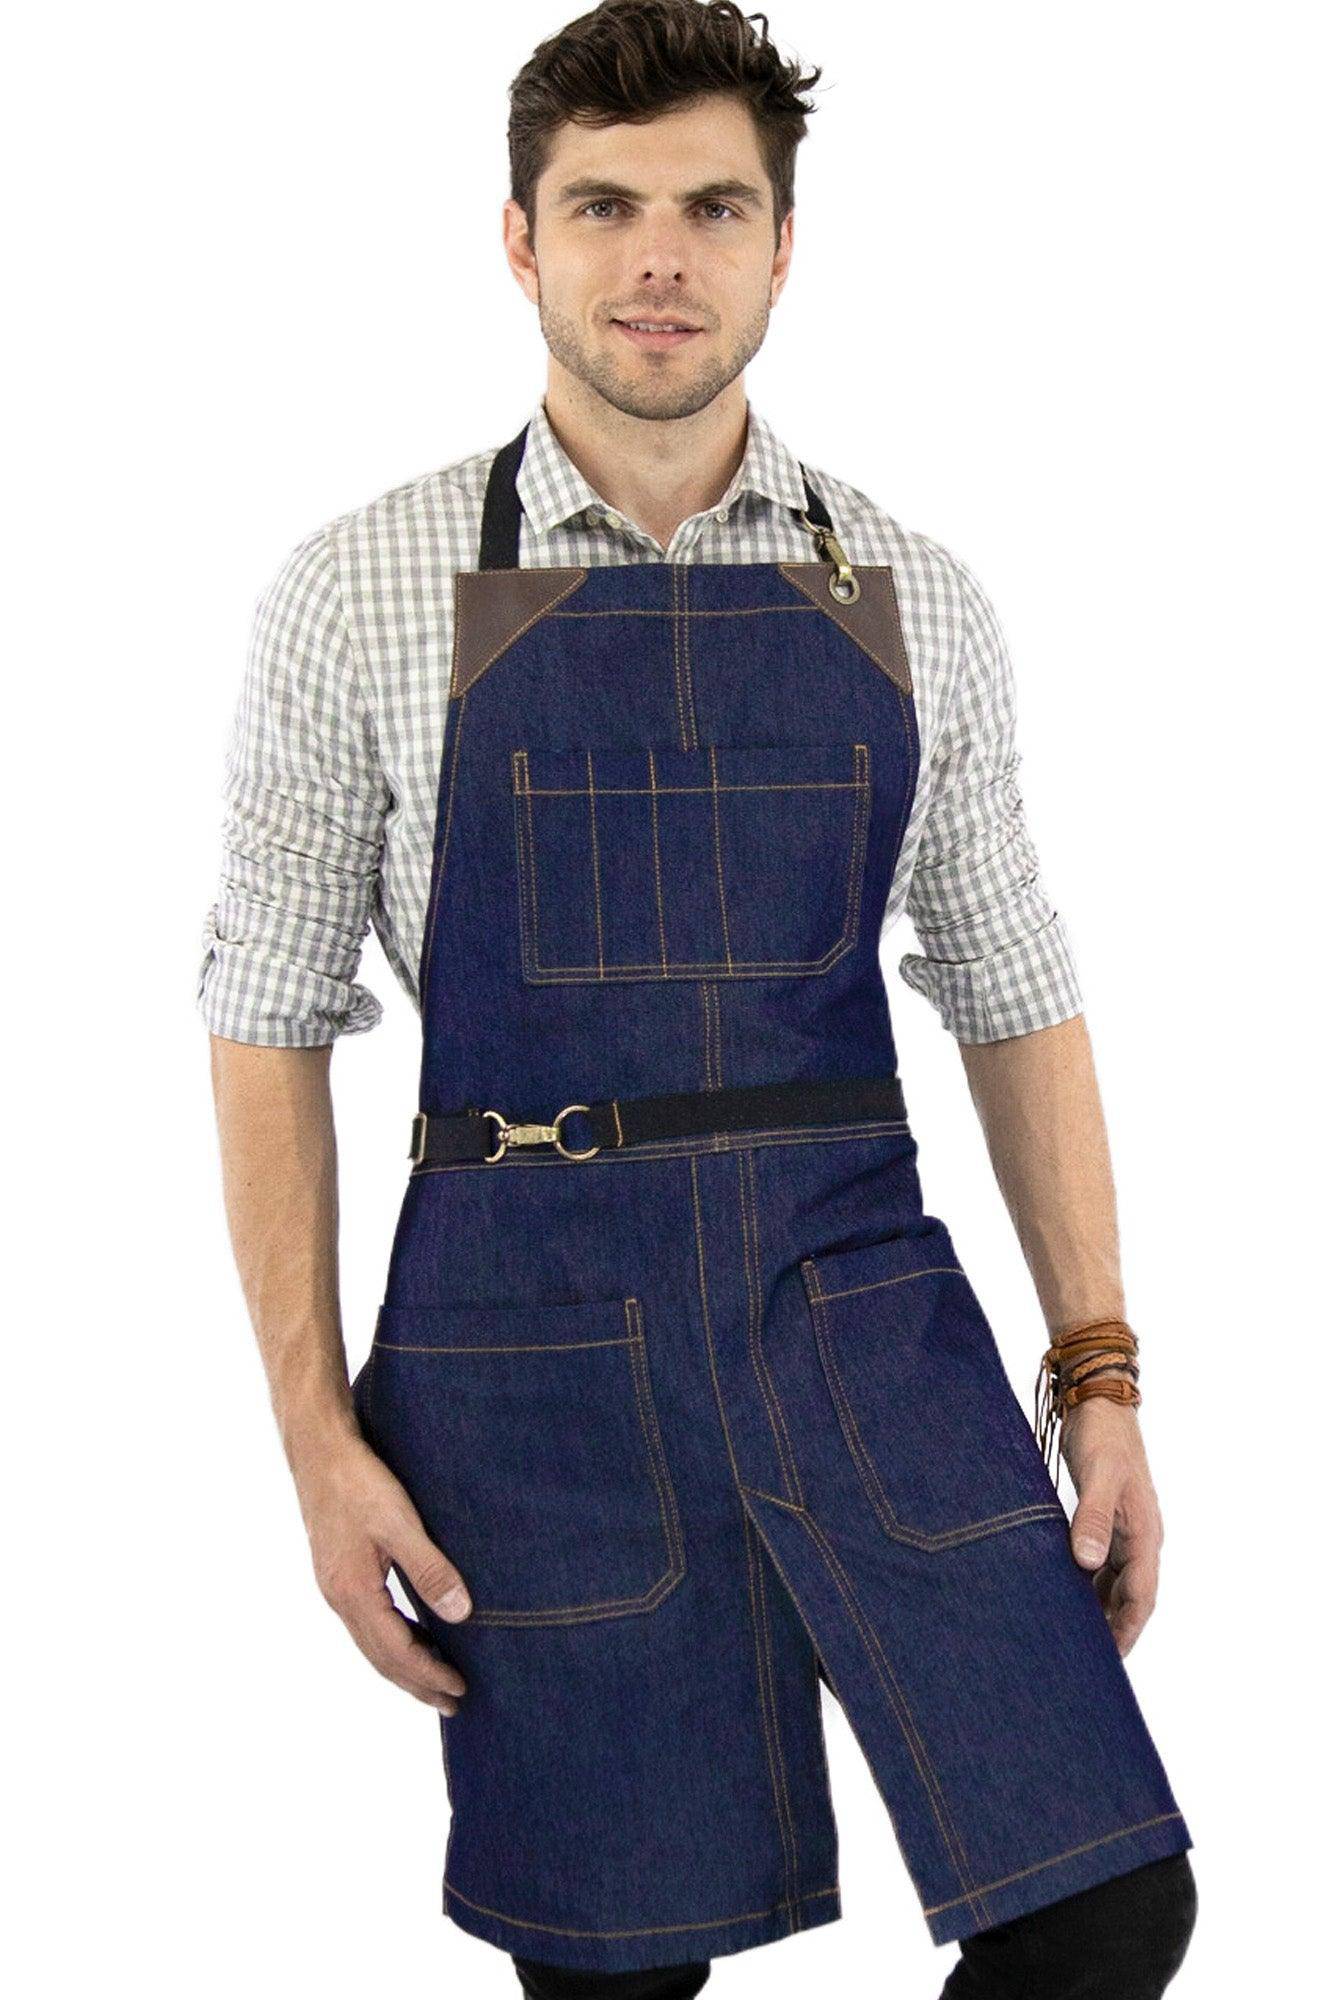 Pin on apron from blue jeans